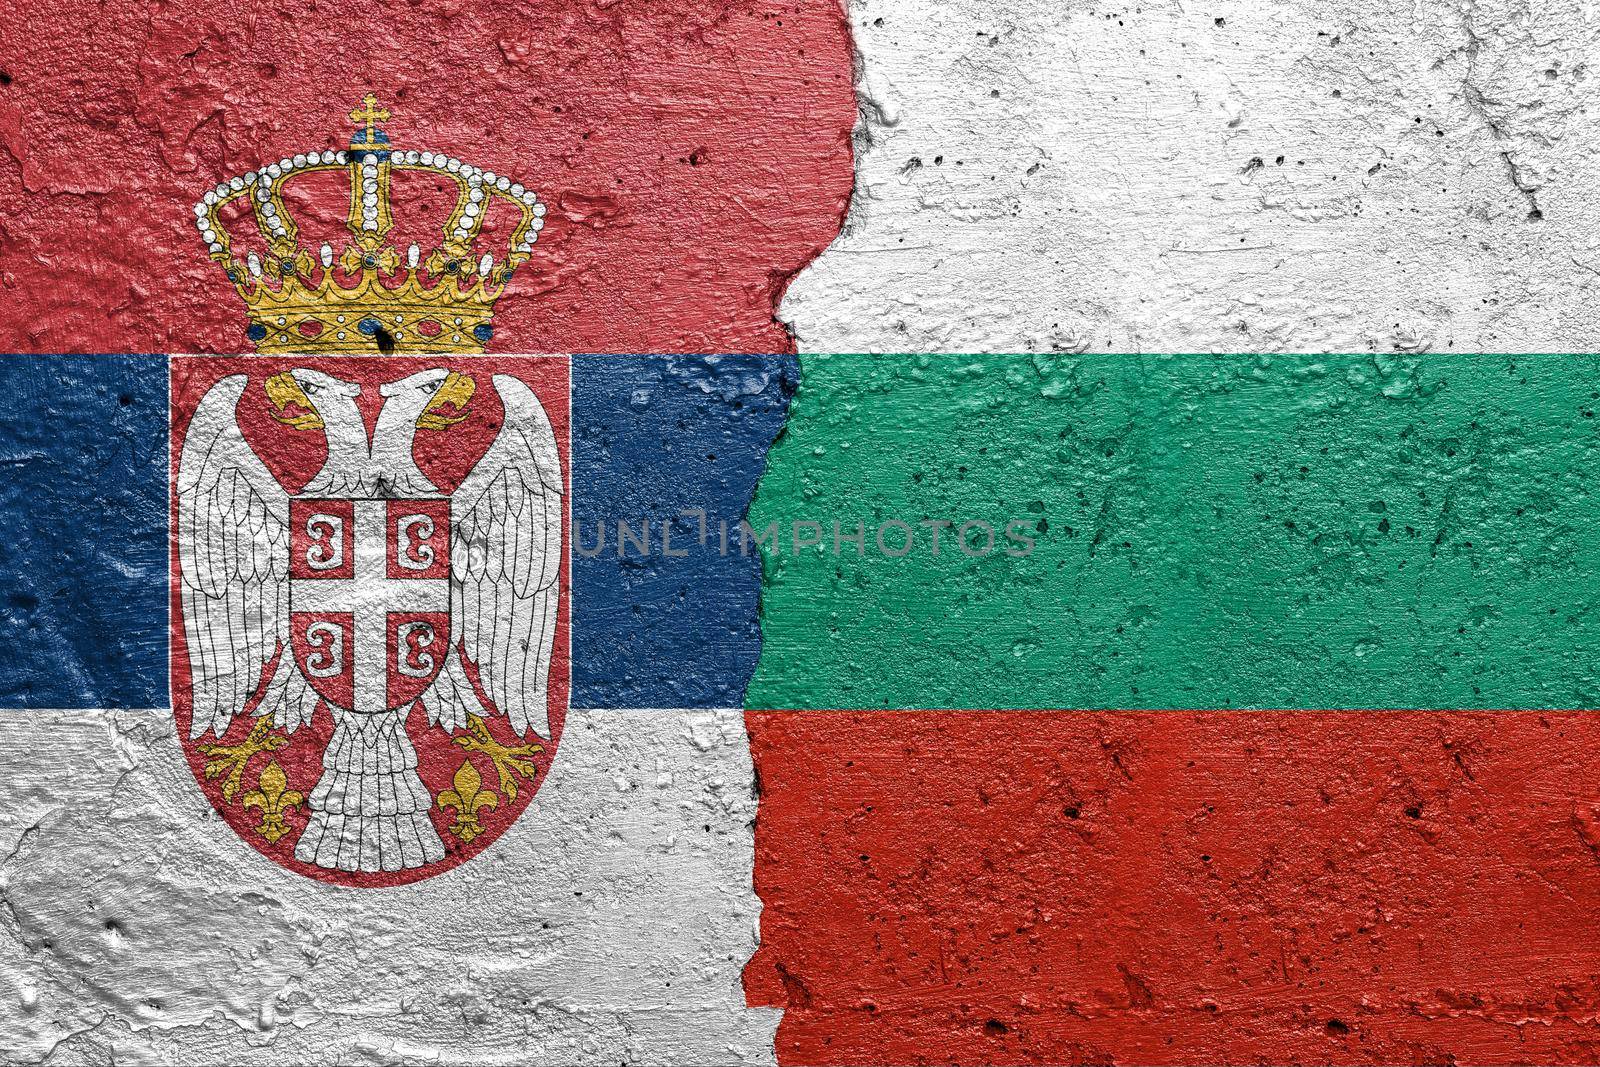 Serbia and Bulgaria flags  - Cracked concrete wall painted with a Serbian flag on the left and a Bulgarian flag on the right